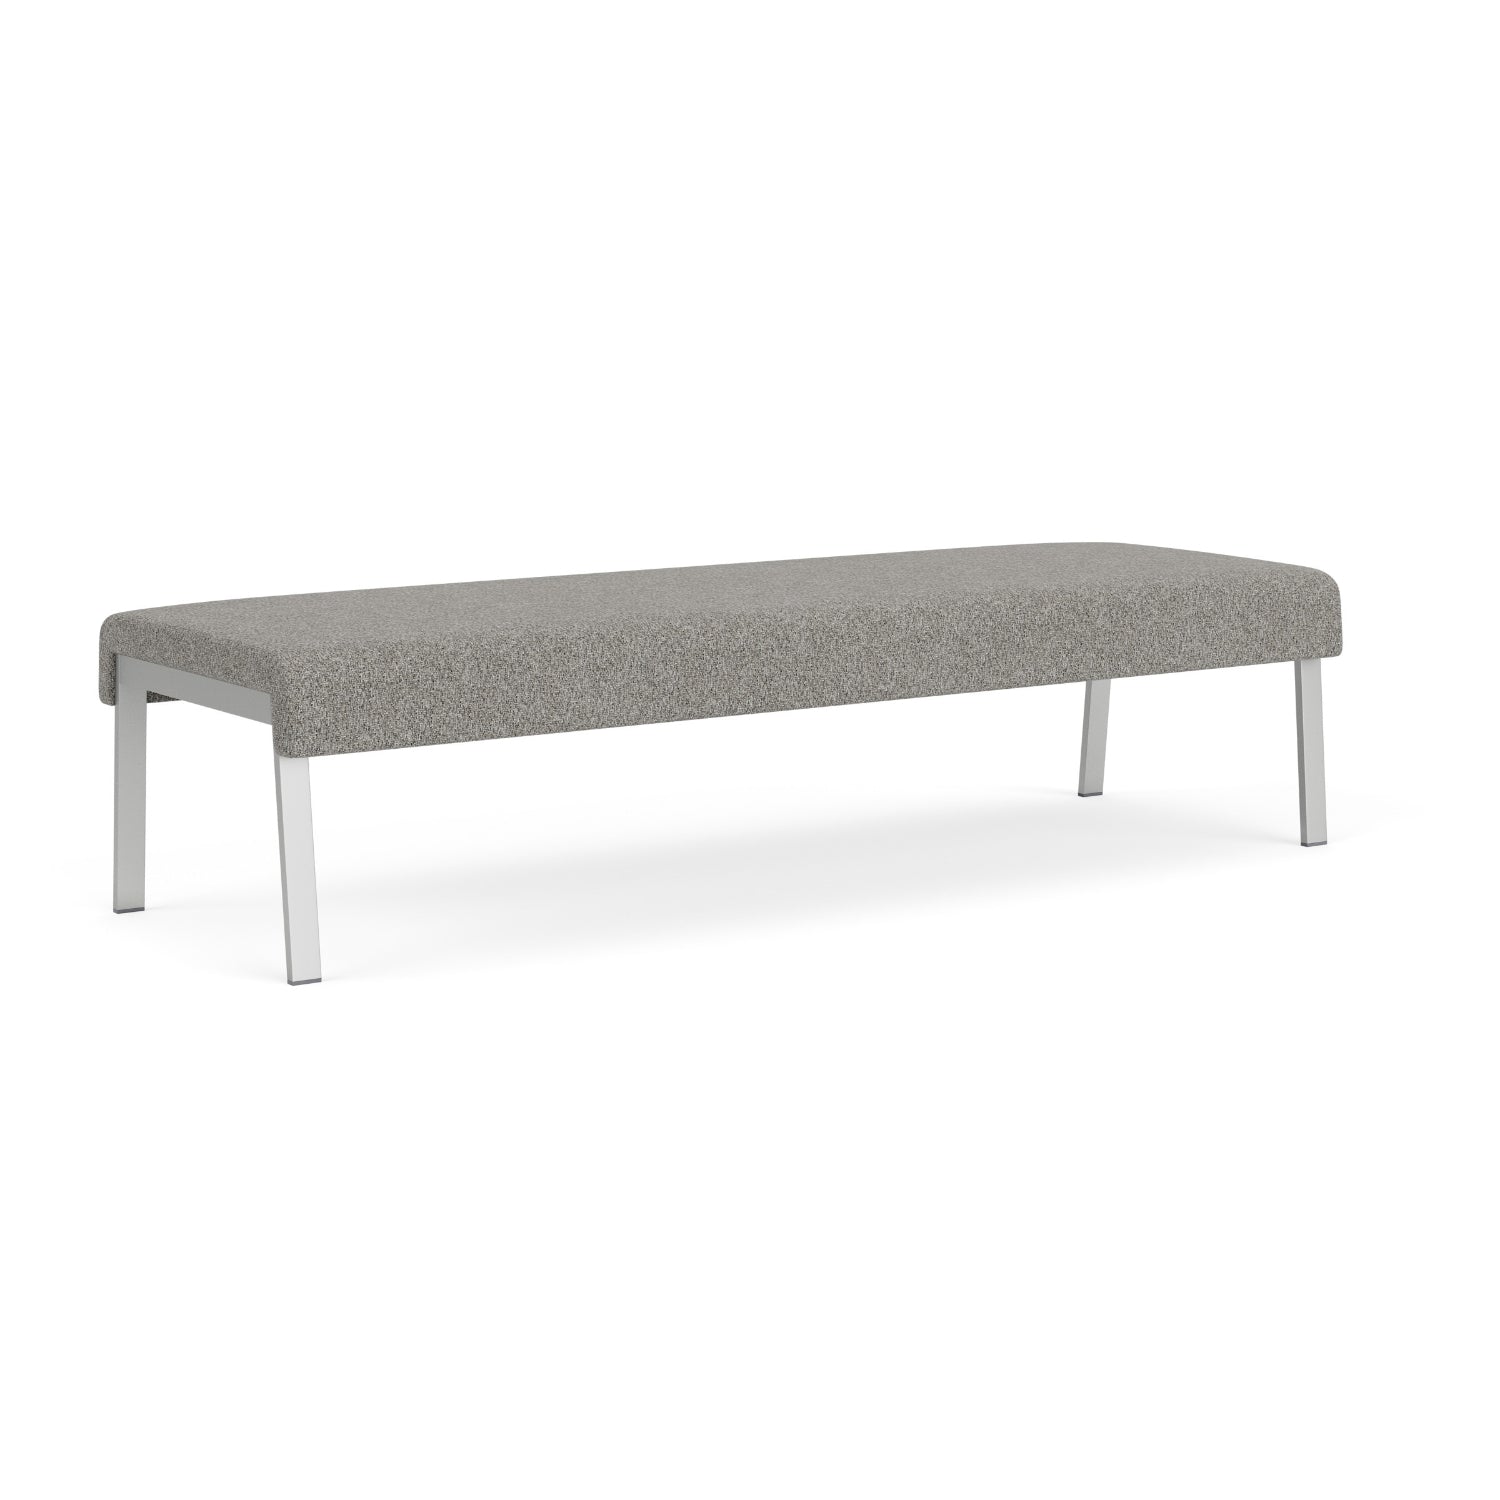 Waterfall Collection Reception Seating, 3-Seat Bench, Leg Base, Standard Fabric Upholstery, FREE SHIPPING